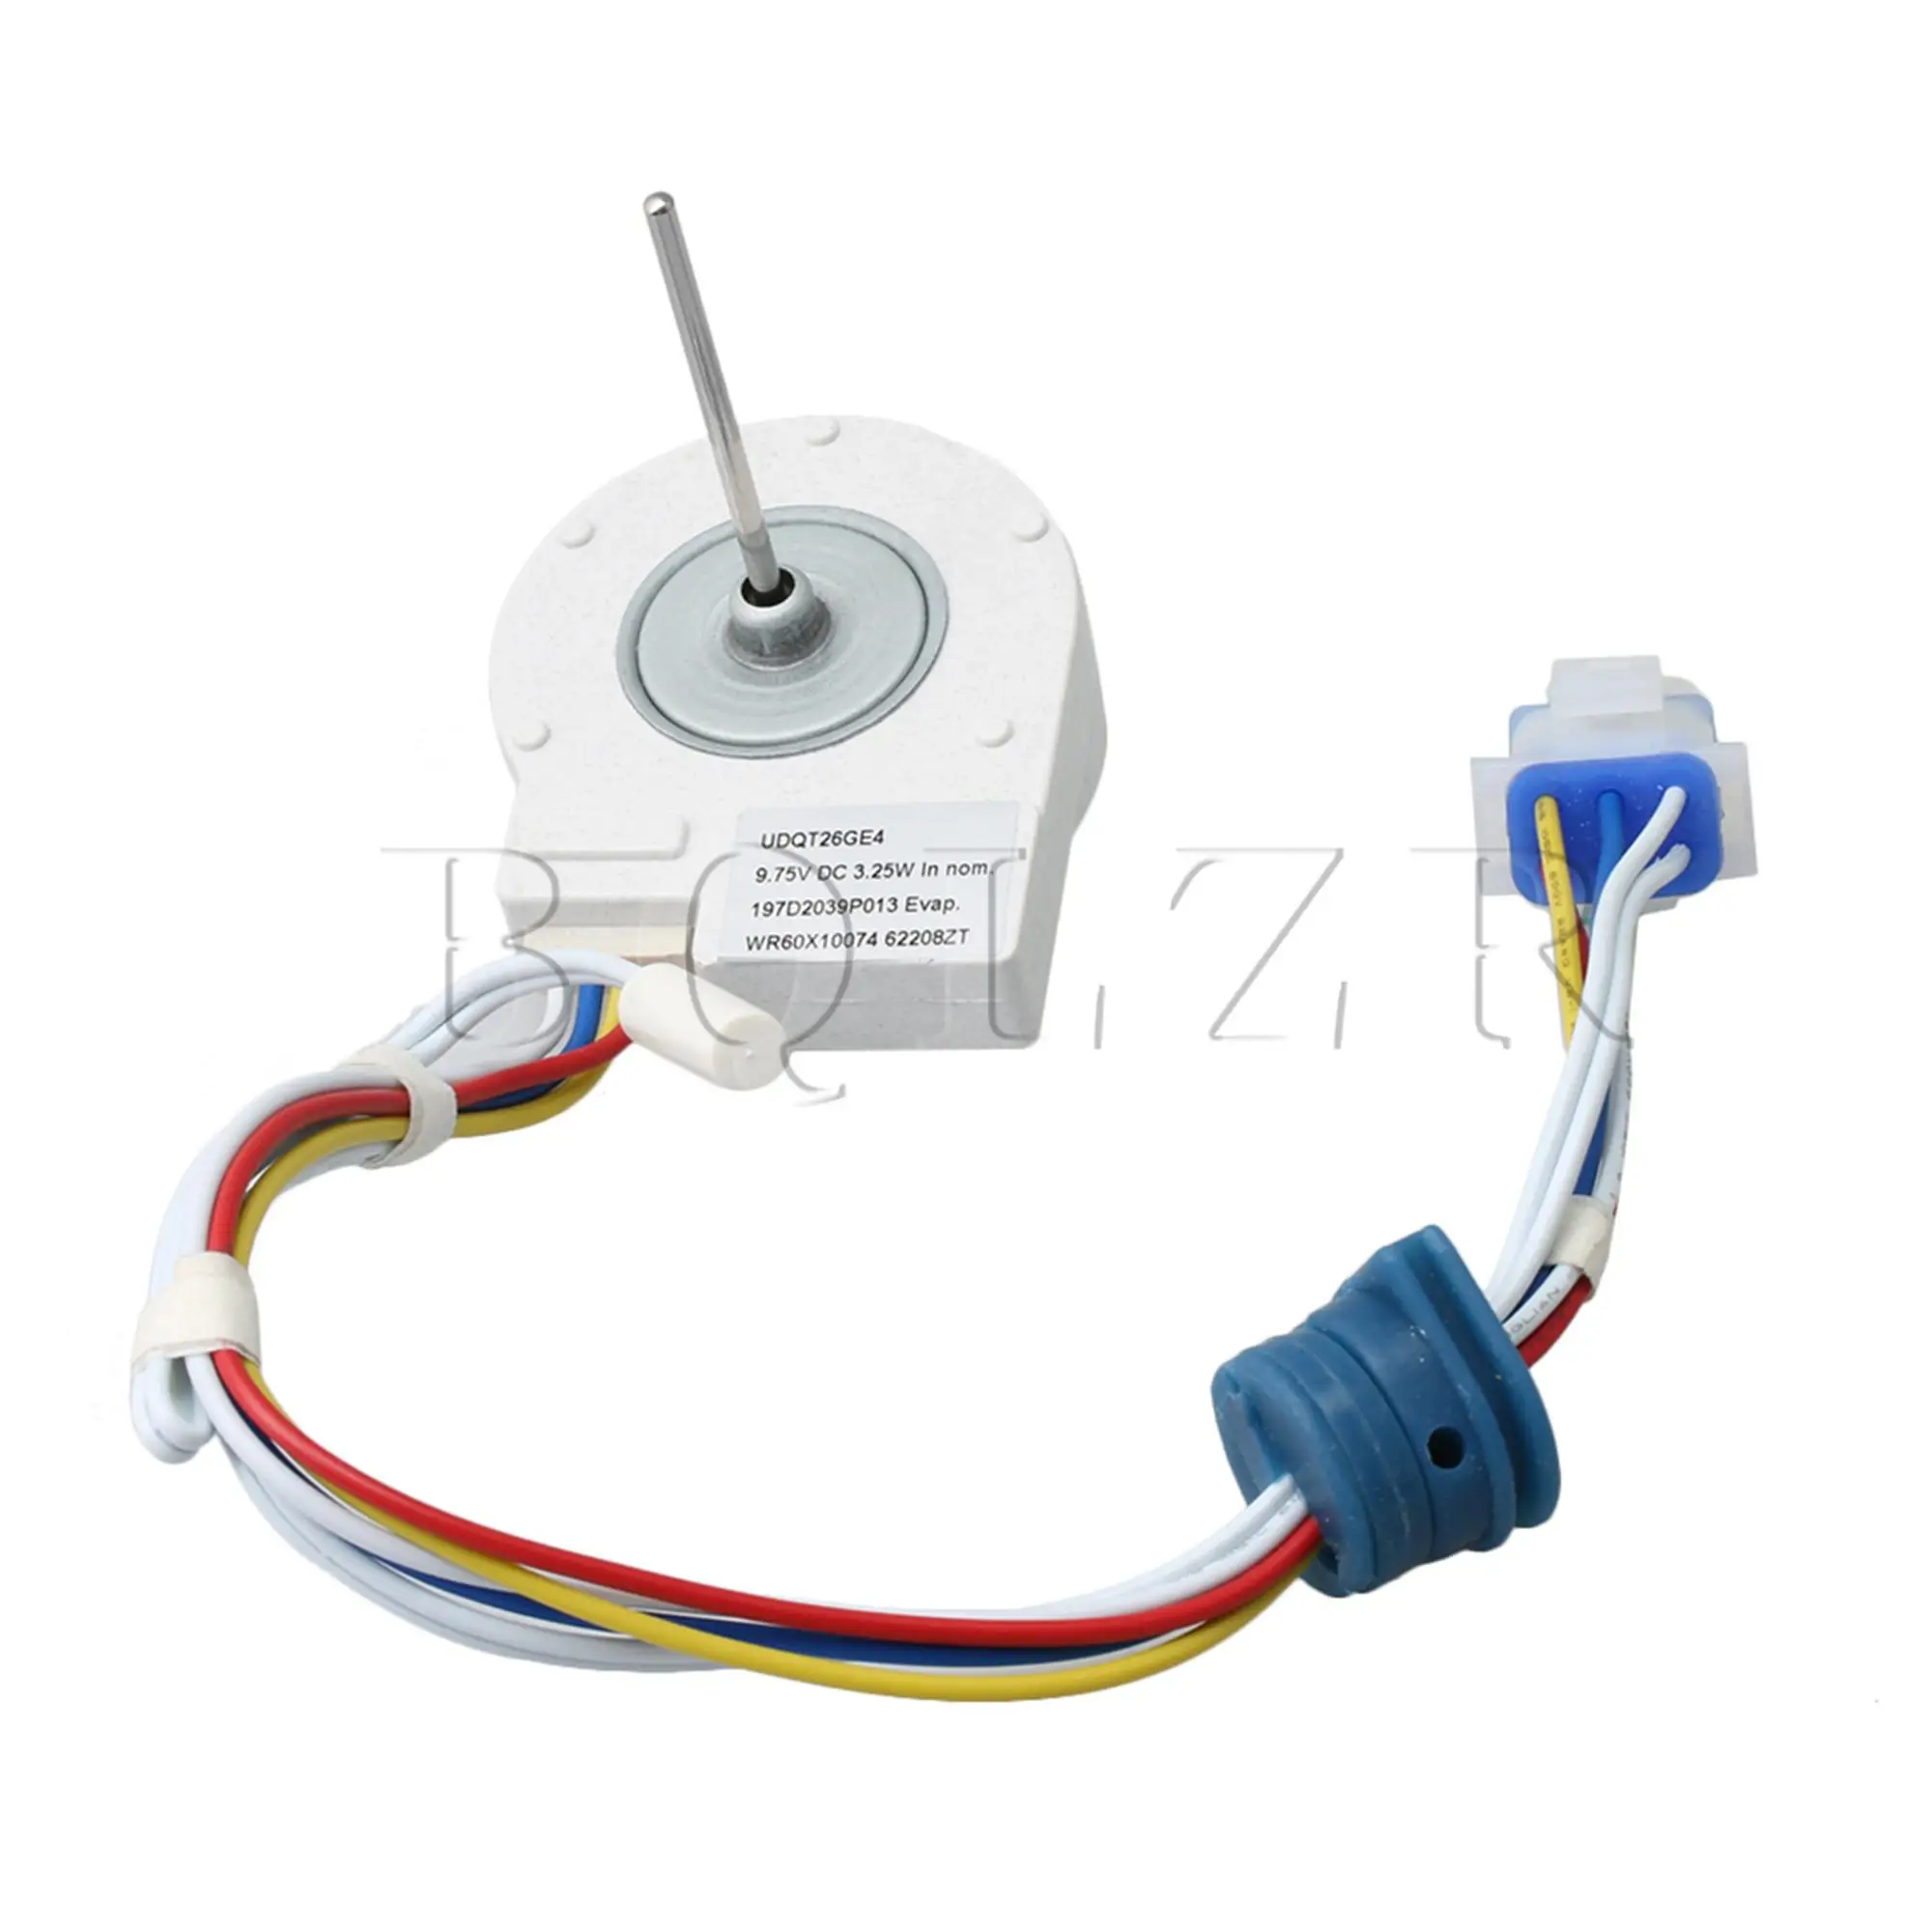 5xBQLZR Compatible Evaporator Fan Motor Replacement for WR60X10074 General Electric Refrigerator AP3191003